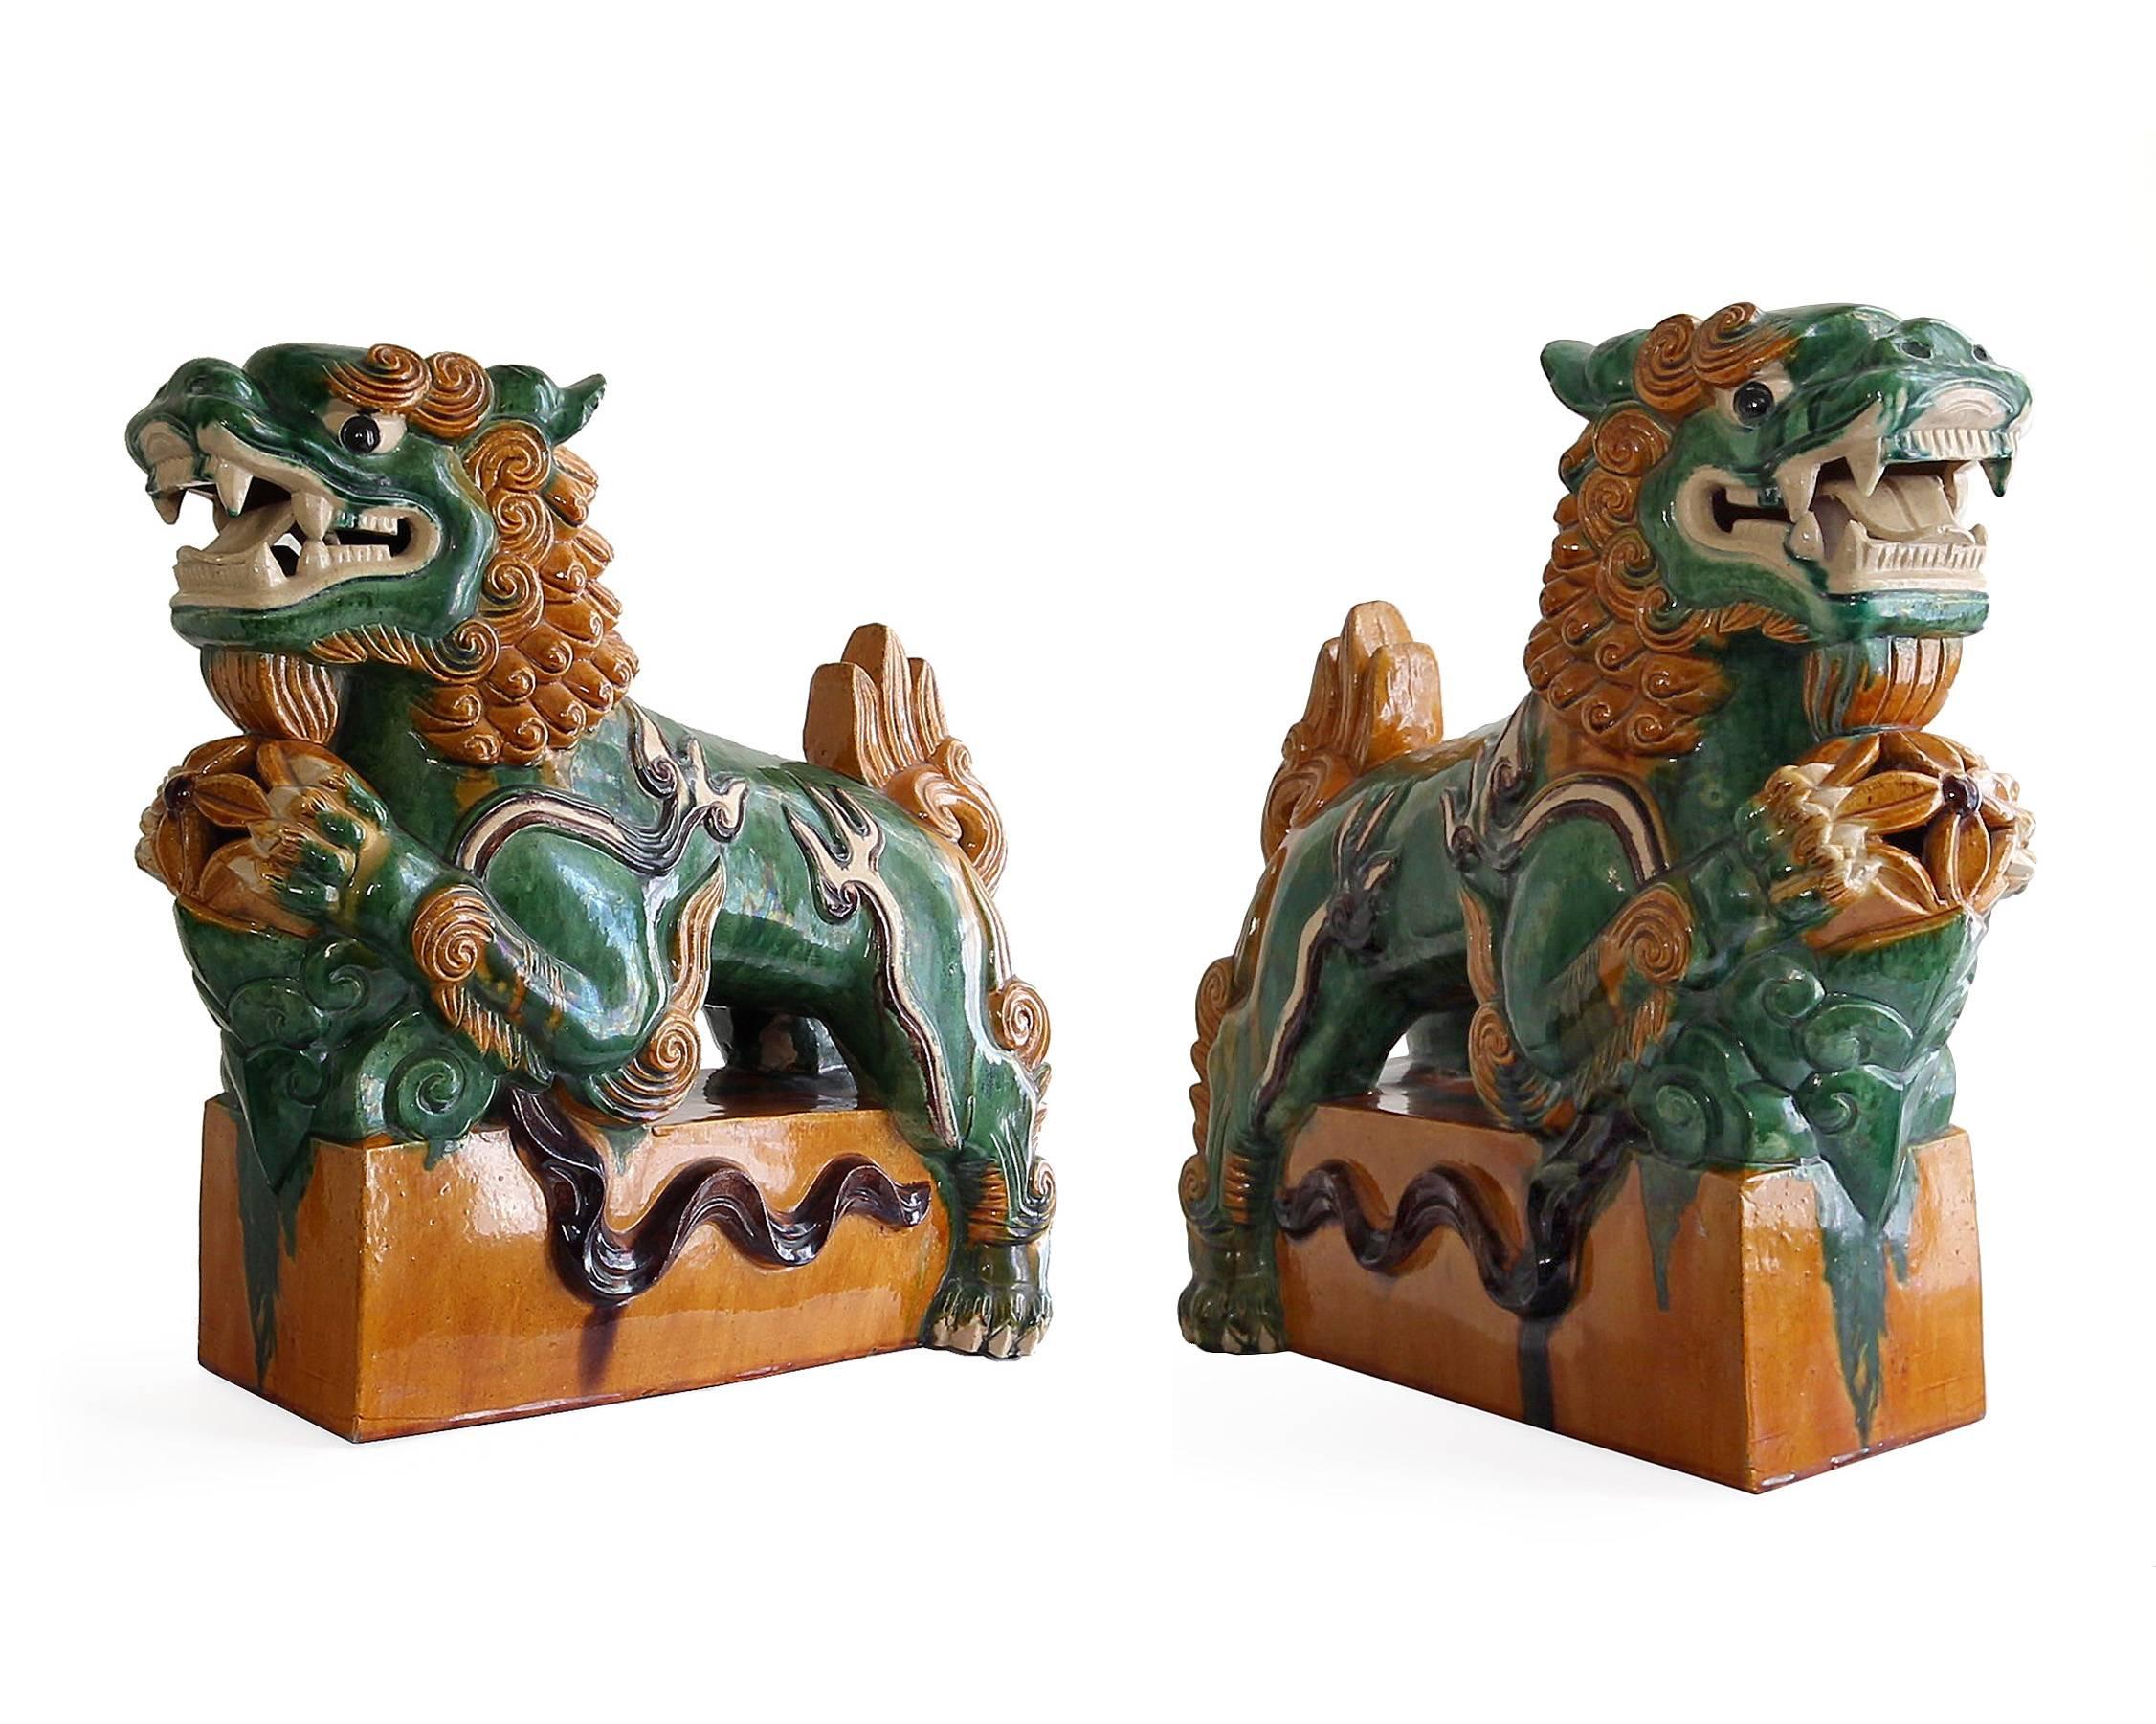 Extremely decorative and colorful pair of Chinese Sancai glazed statues in the form of foo dog lions on resting on pedestals with a ball in their front paws. Each in a mirrored format with open jaws.

Each measures approximately 18